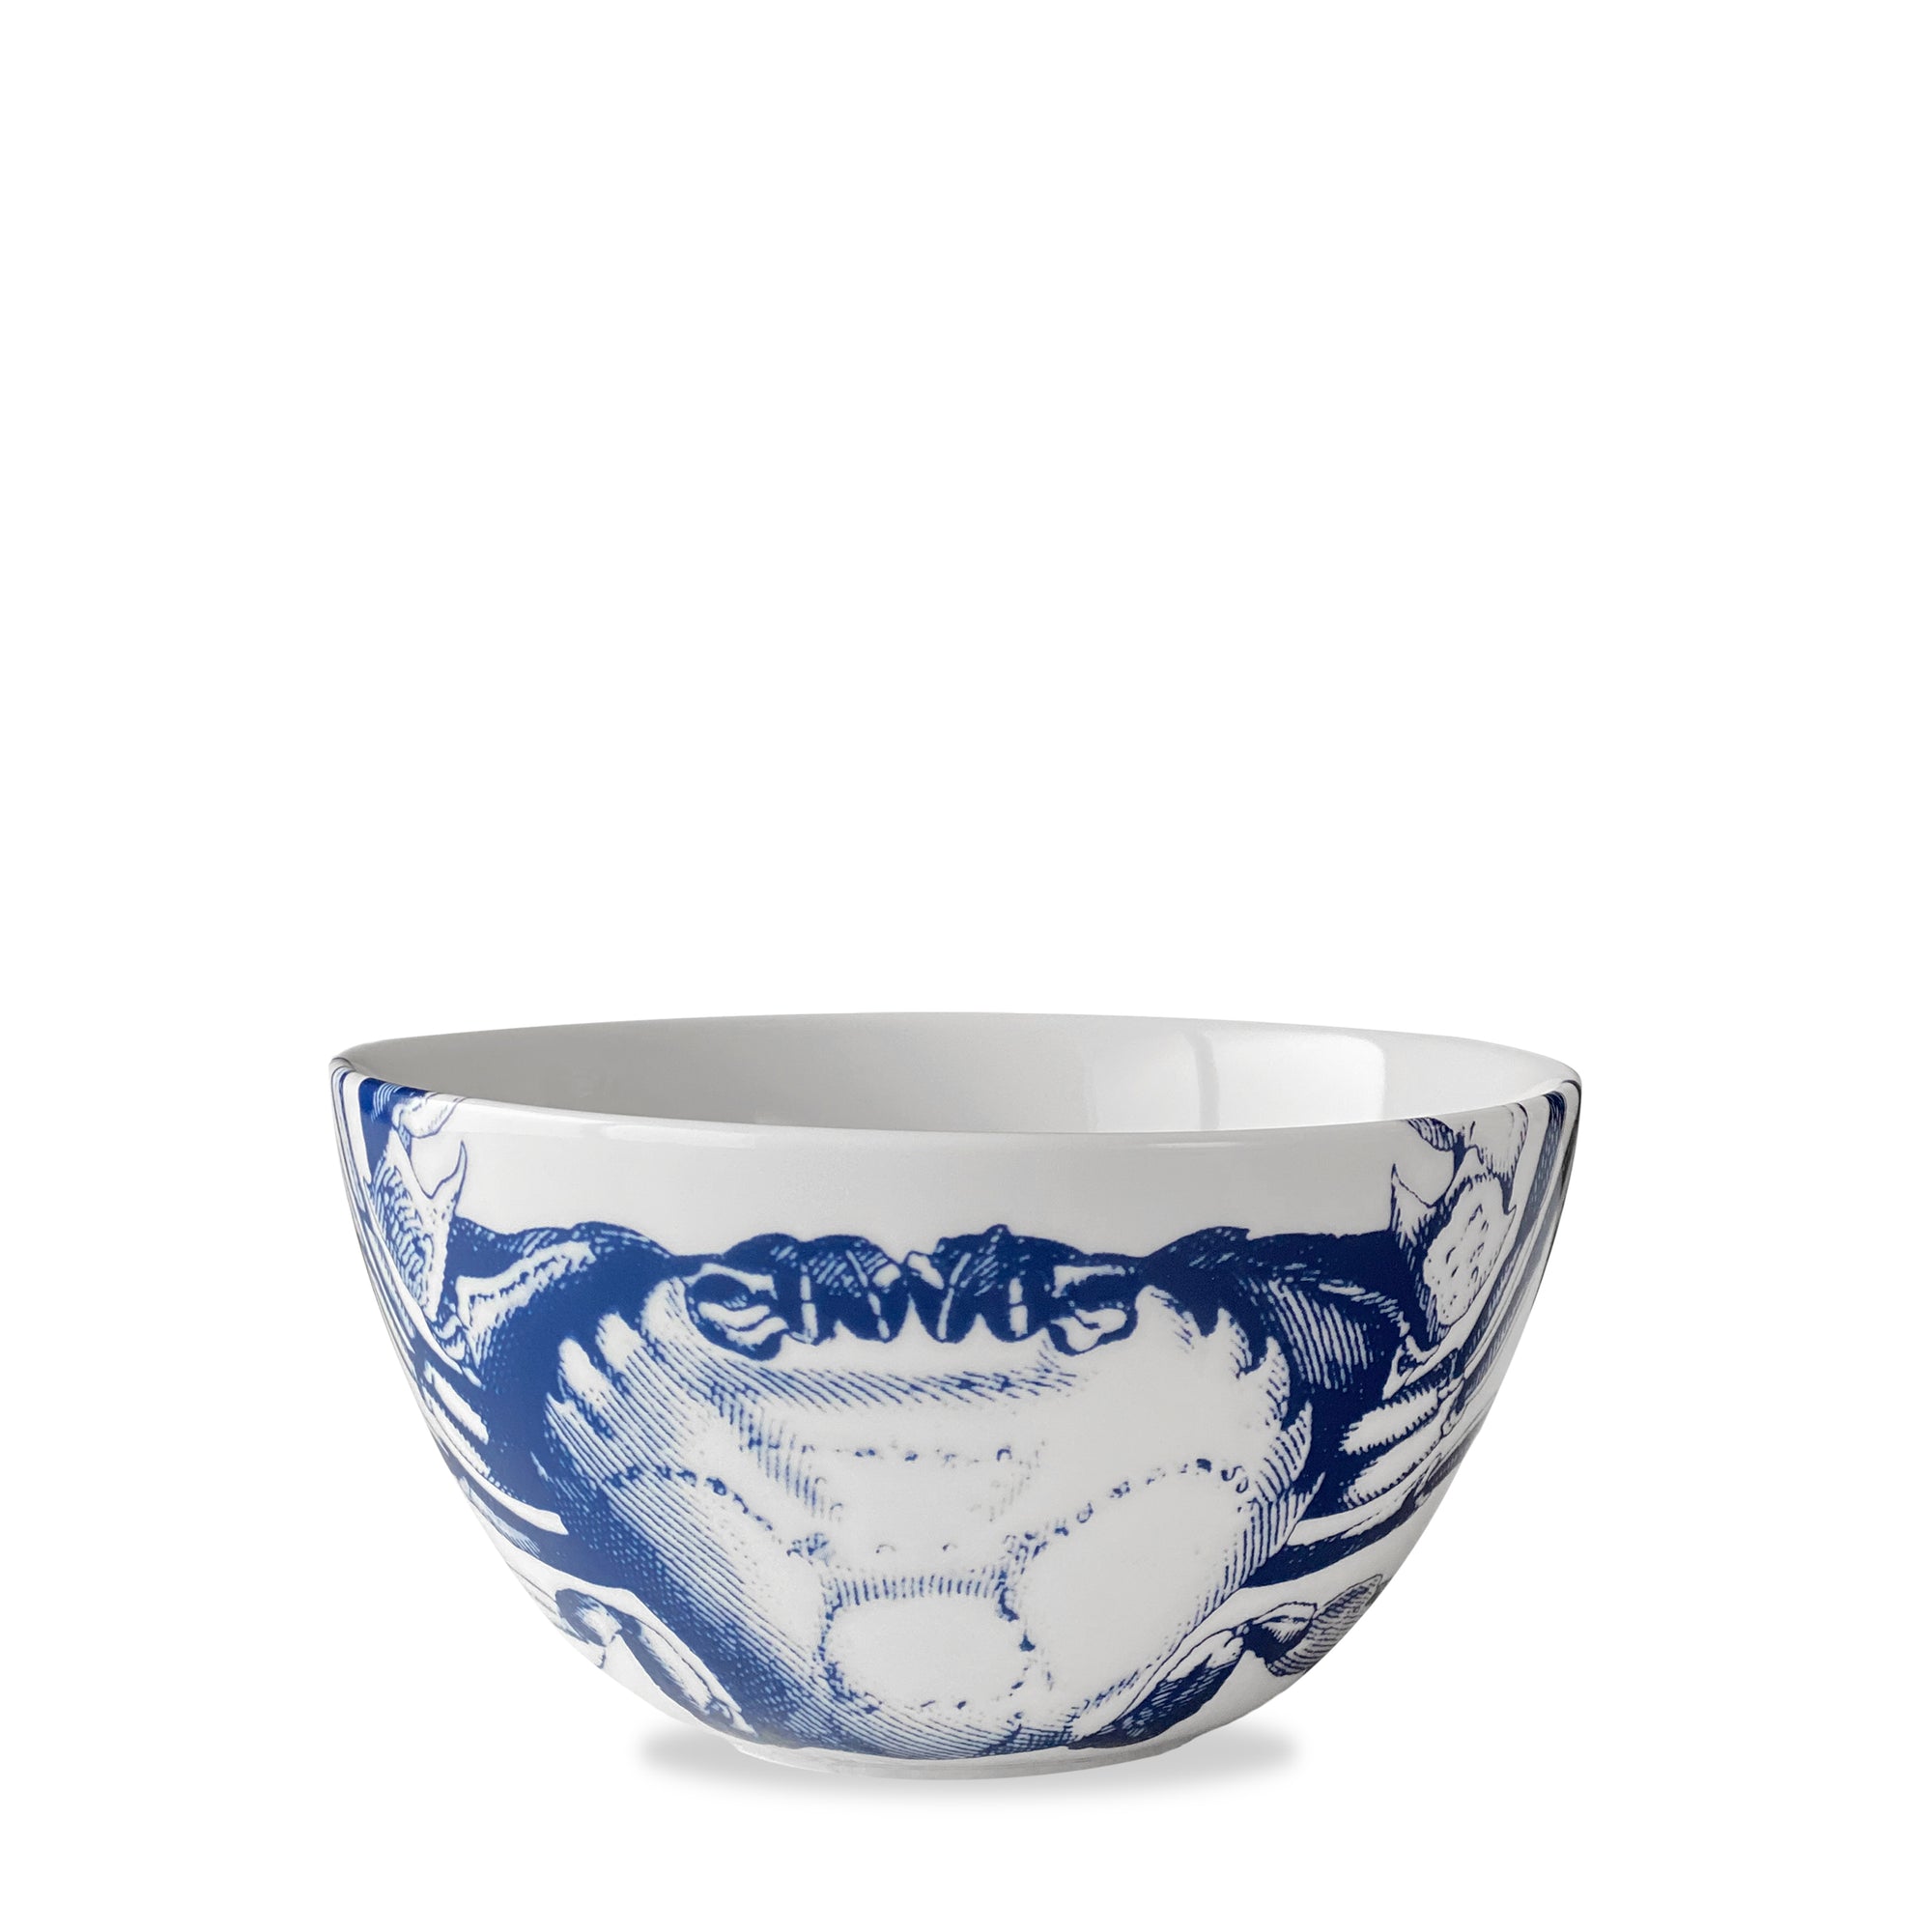 The Caskata Crab Cereal Bowl features a white ceramic base with intricate blue detailing, showcasing an elegant crabs pattern on the exterior.